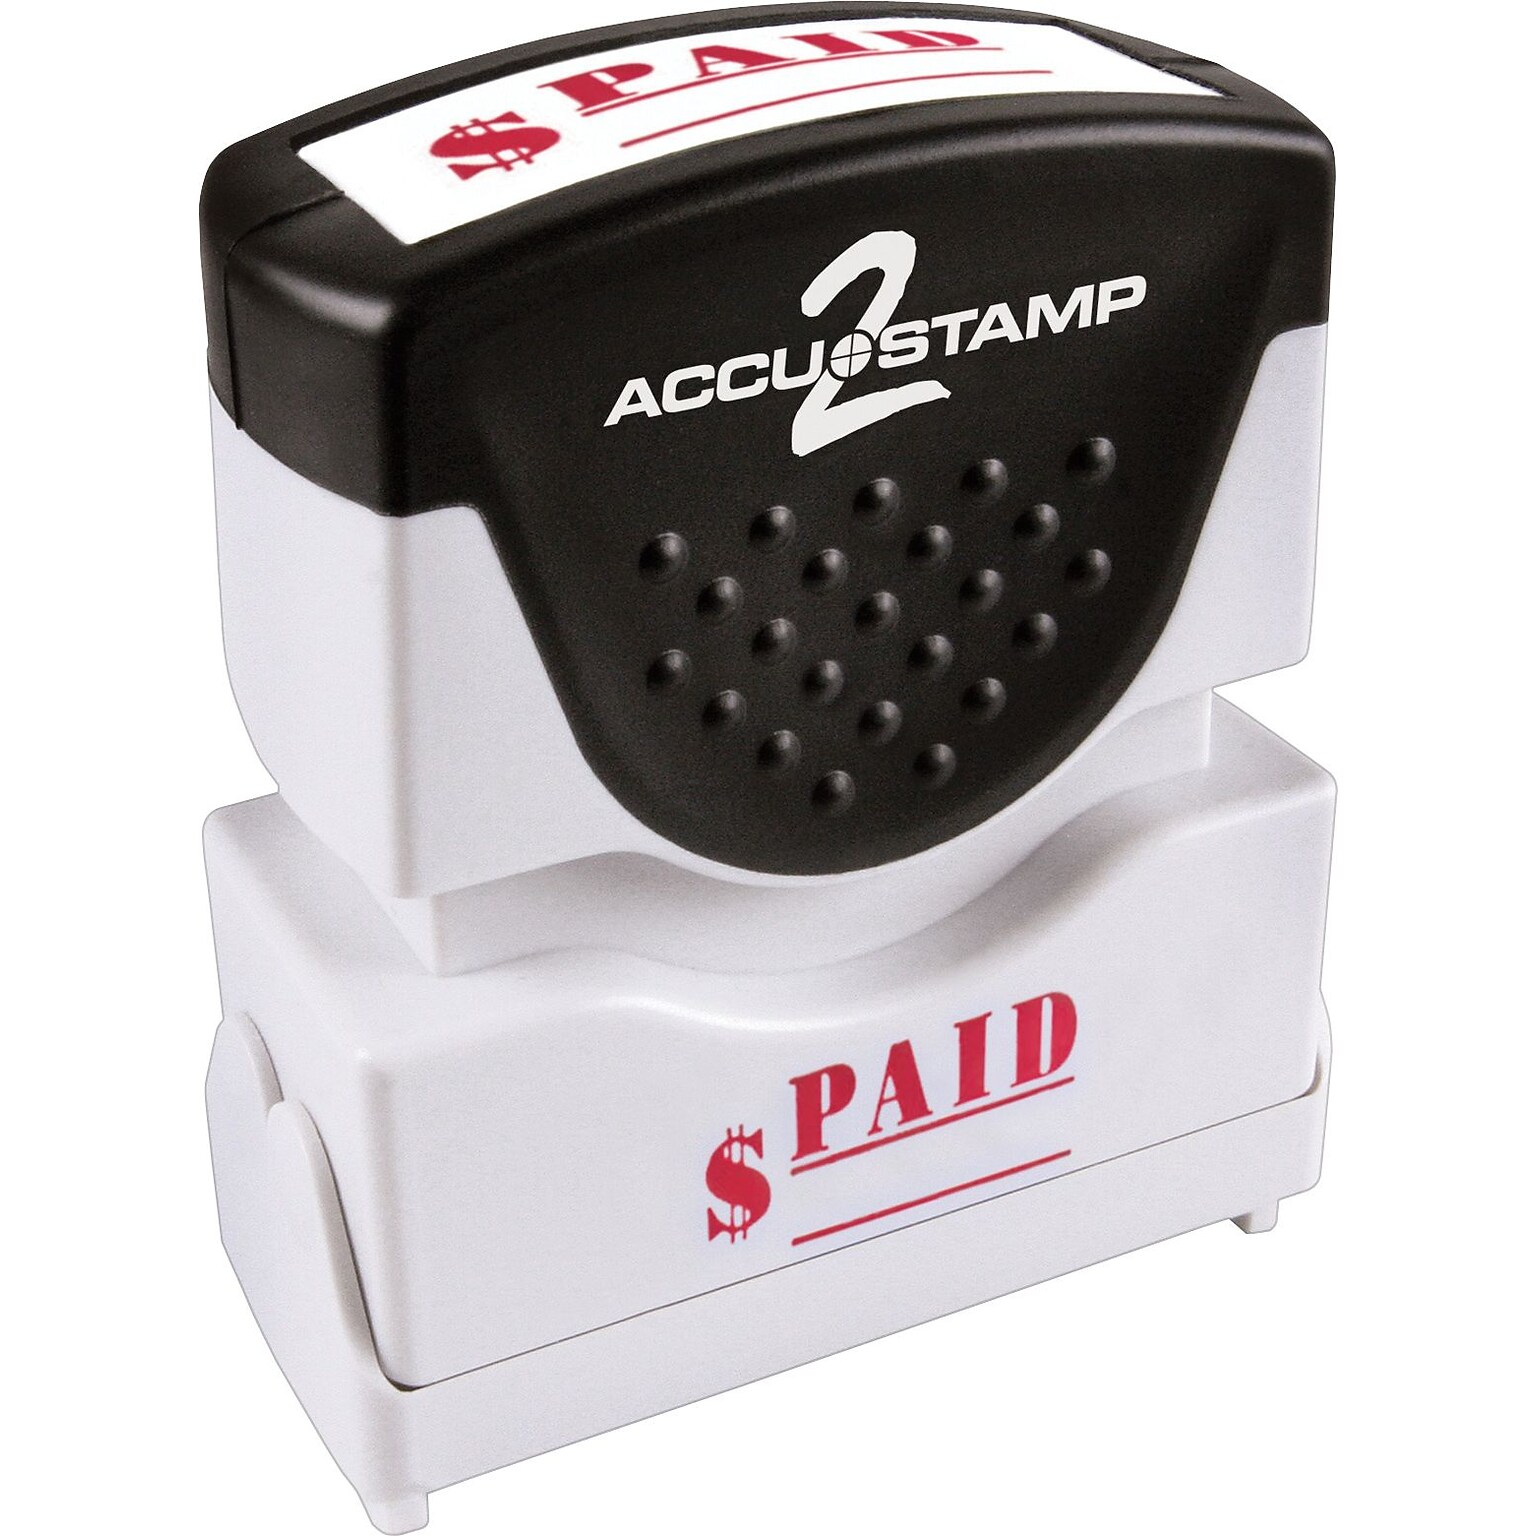 Accu-Stamp2 One-Color Pre-Inked Shutter Message Stamp, PAID, 1/2 x 1-5/8 Impression, Red Ink (035578)